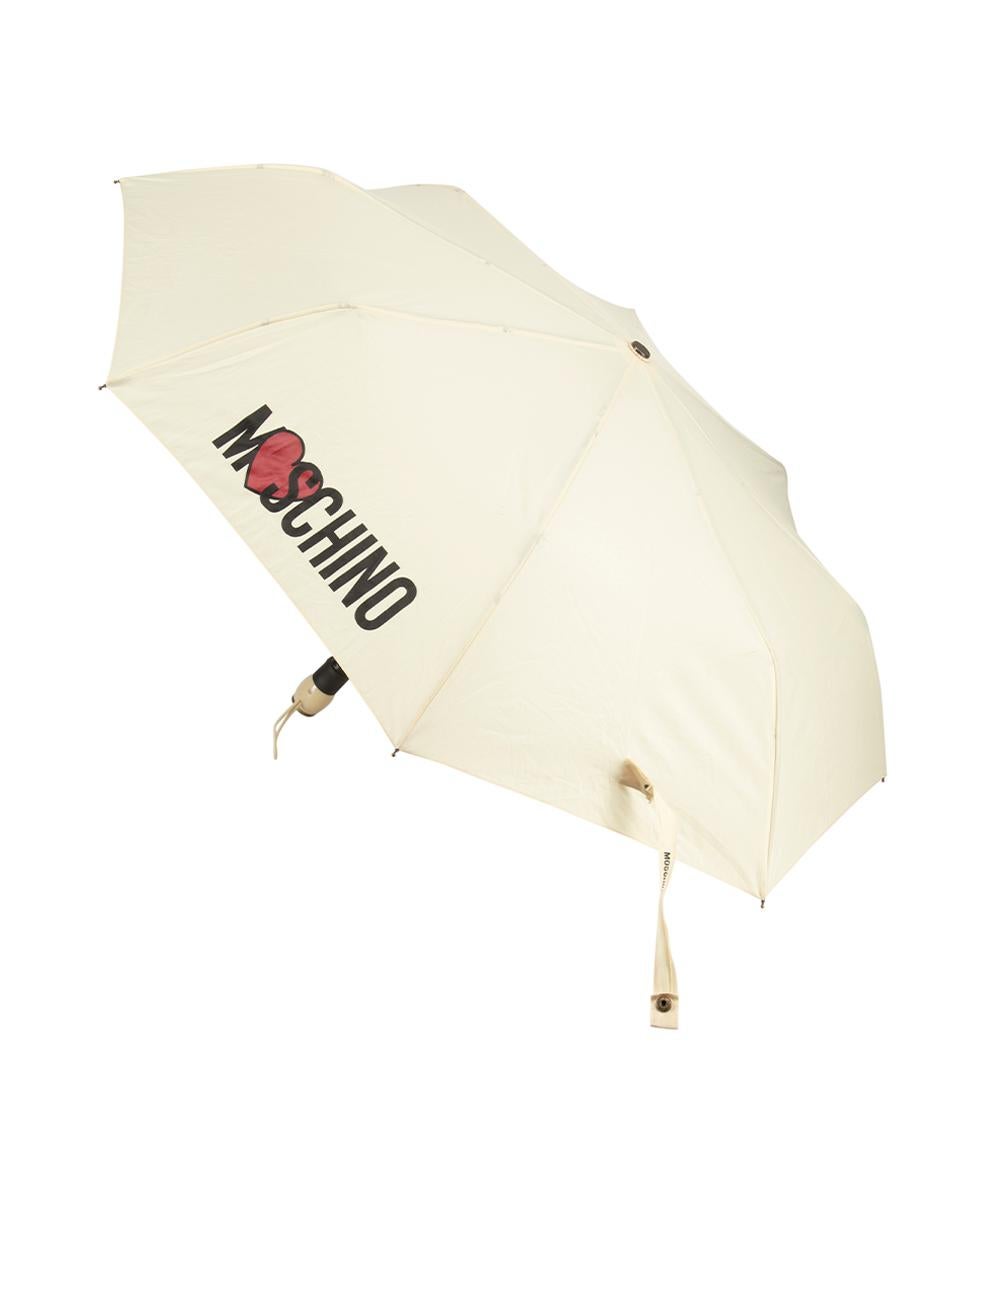 CONDITION is Good. Minor wear to umbrella is evident. Light wear to the exterior with discoloured marks. The handle also has scratches to the metal and the original cover is missing on this used Moschino designer resale item.
 